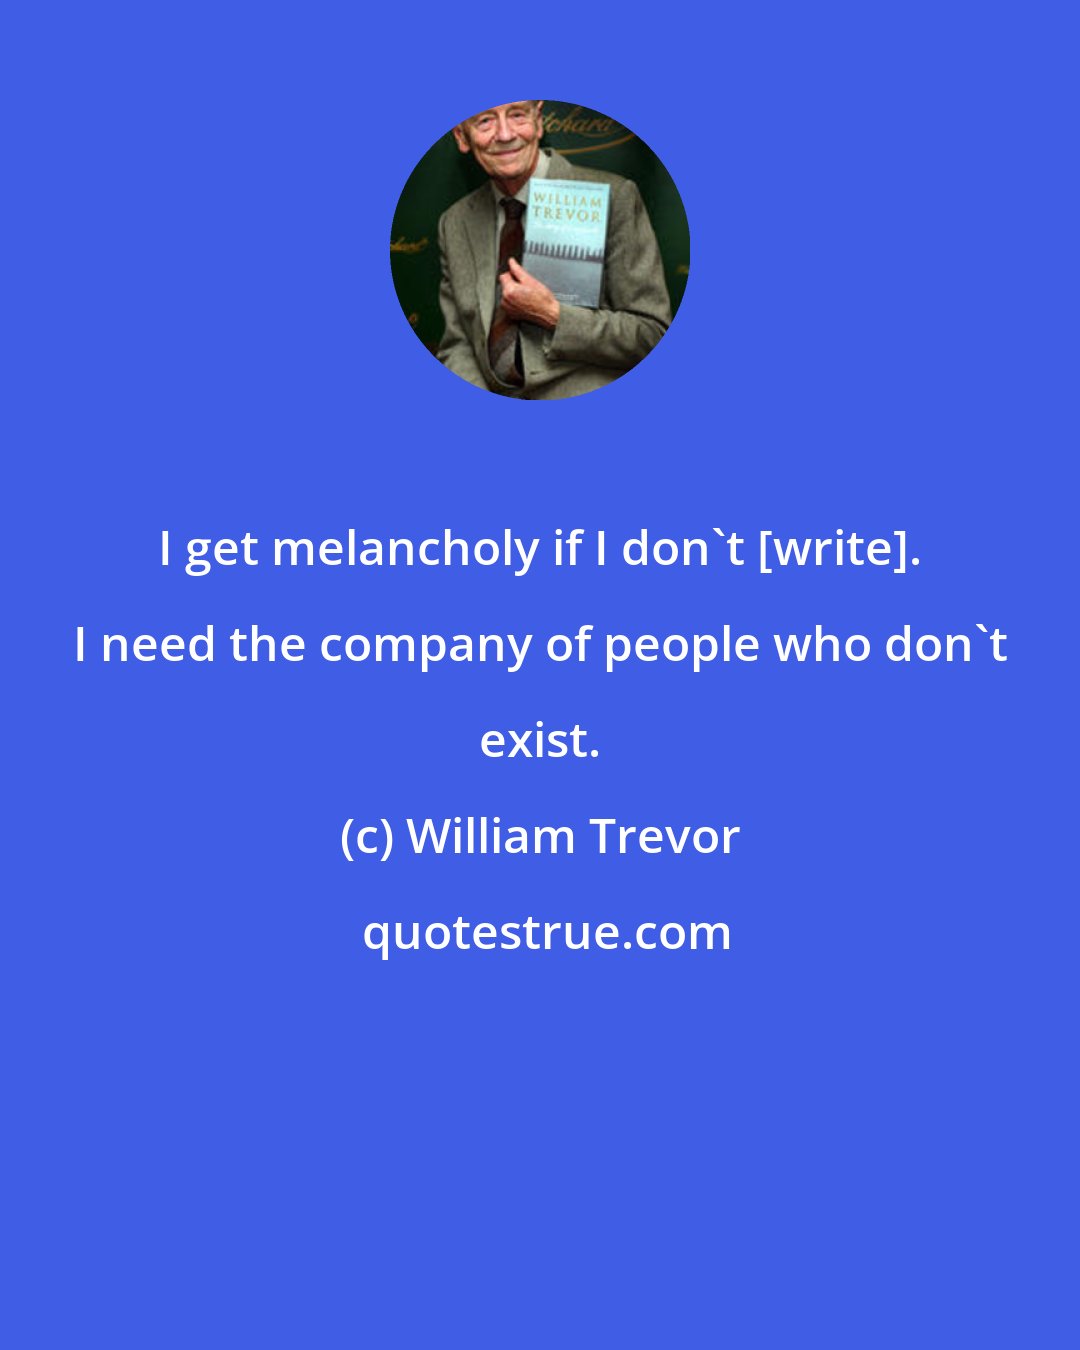 William Trevor: I get melancholy if I don't [write]. I need the company of people who don't exist.